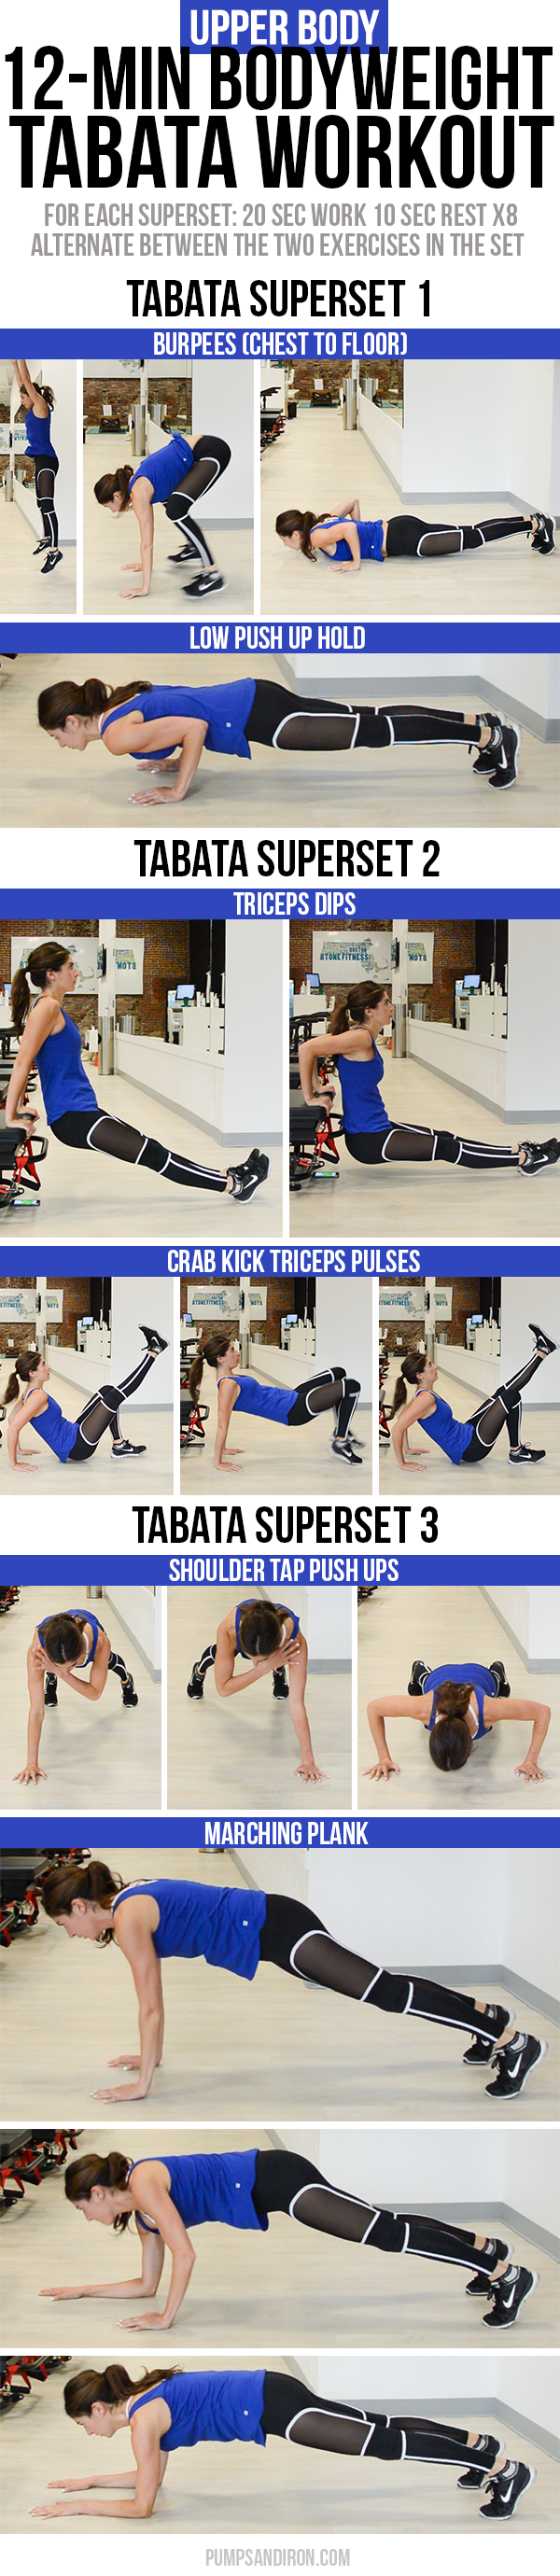 12-Minute Bodyweight Tabata Workout Series: Upper Body (Chest, Arms, Core)